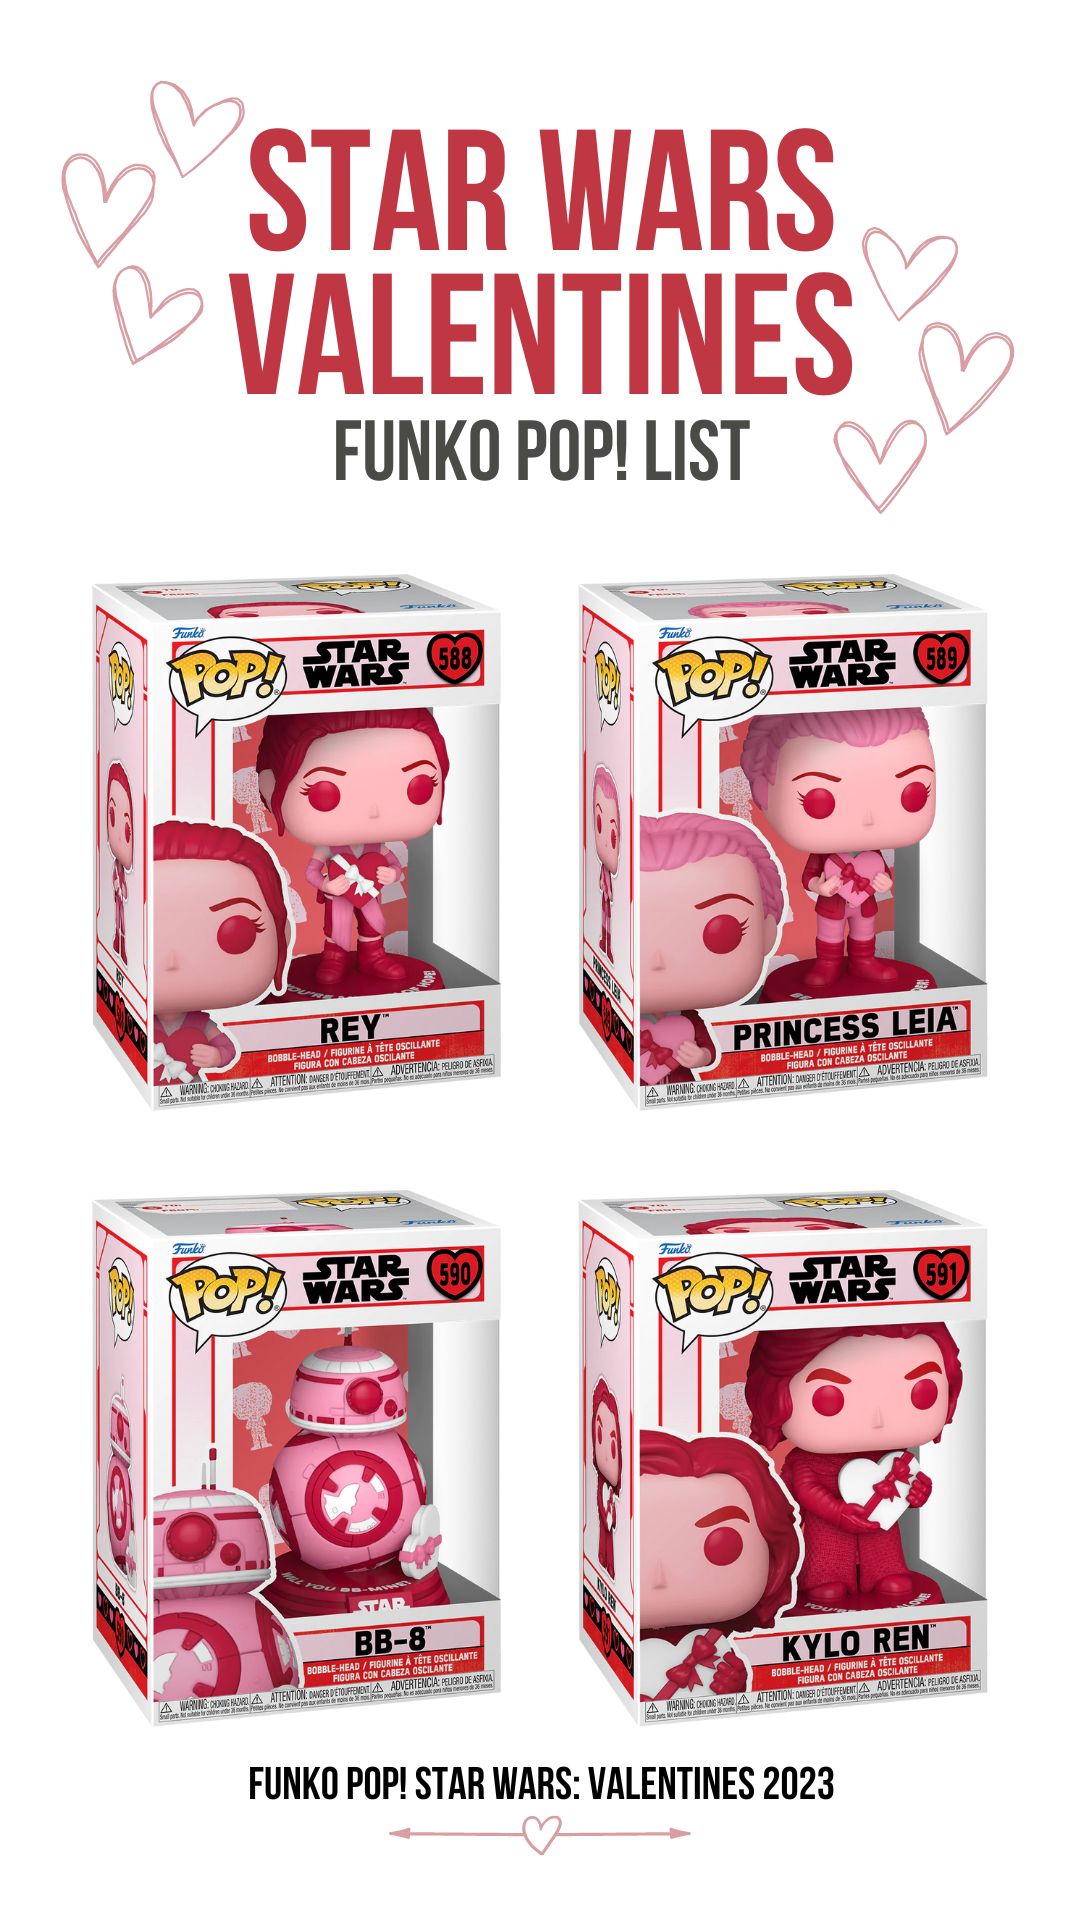 Star Wars Funko Pop Valentines List of Figures with Boxes 2023